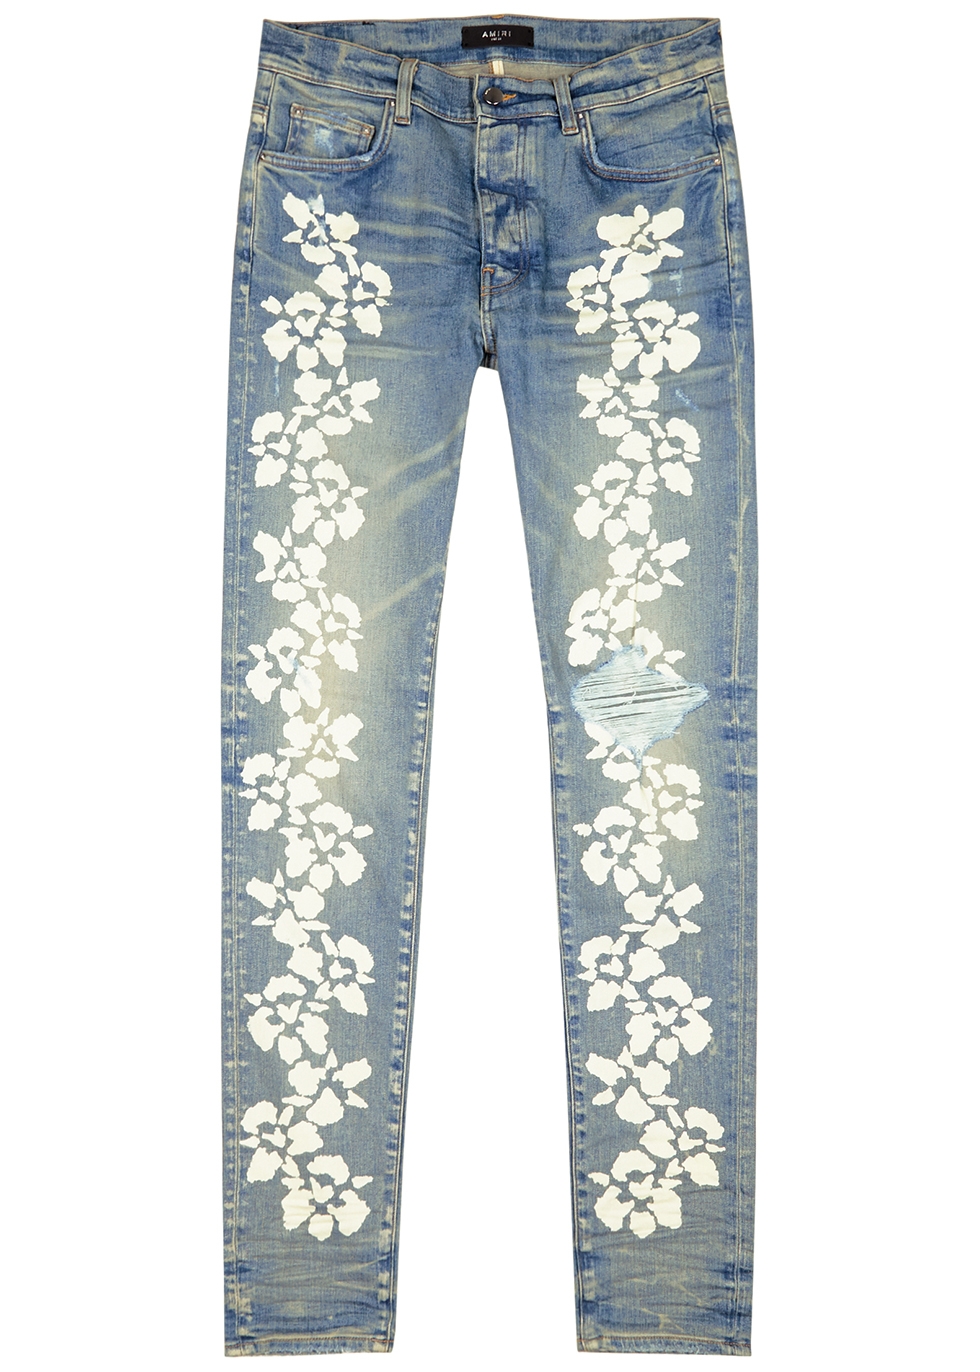 Hibiscus Stencil blue distressed skinny jeans